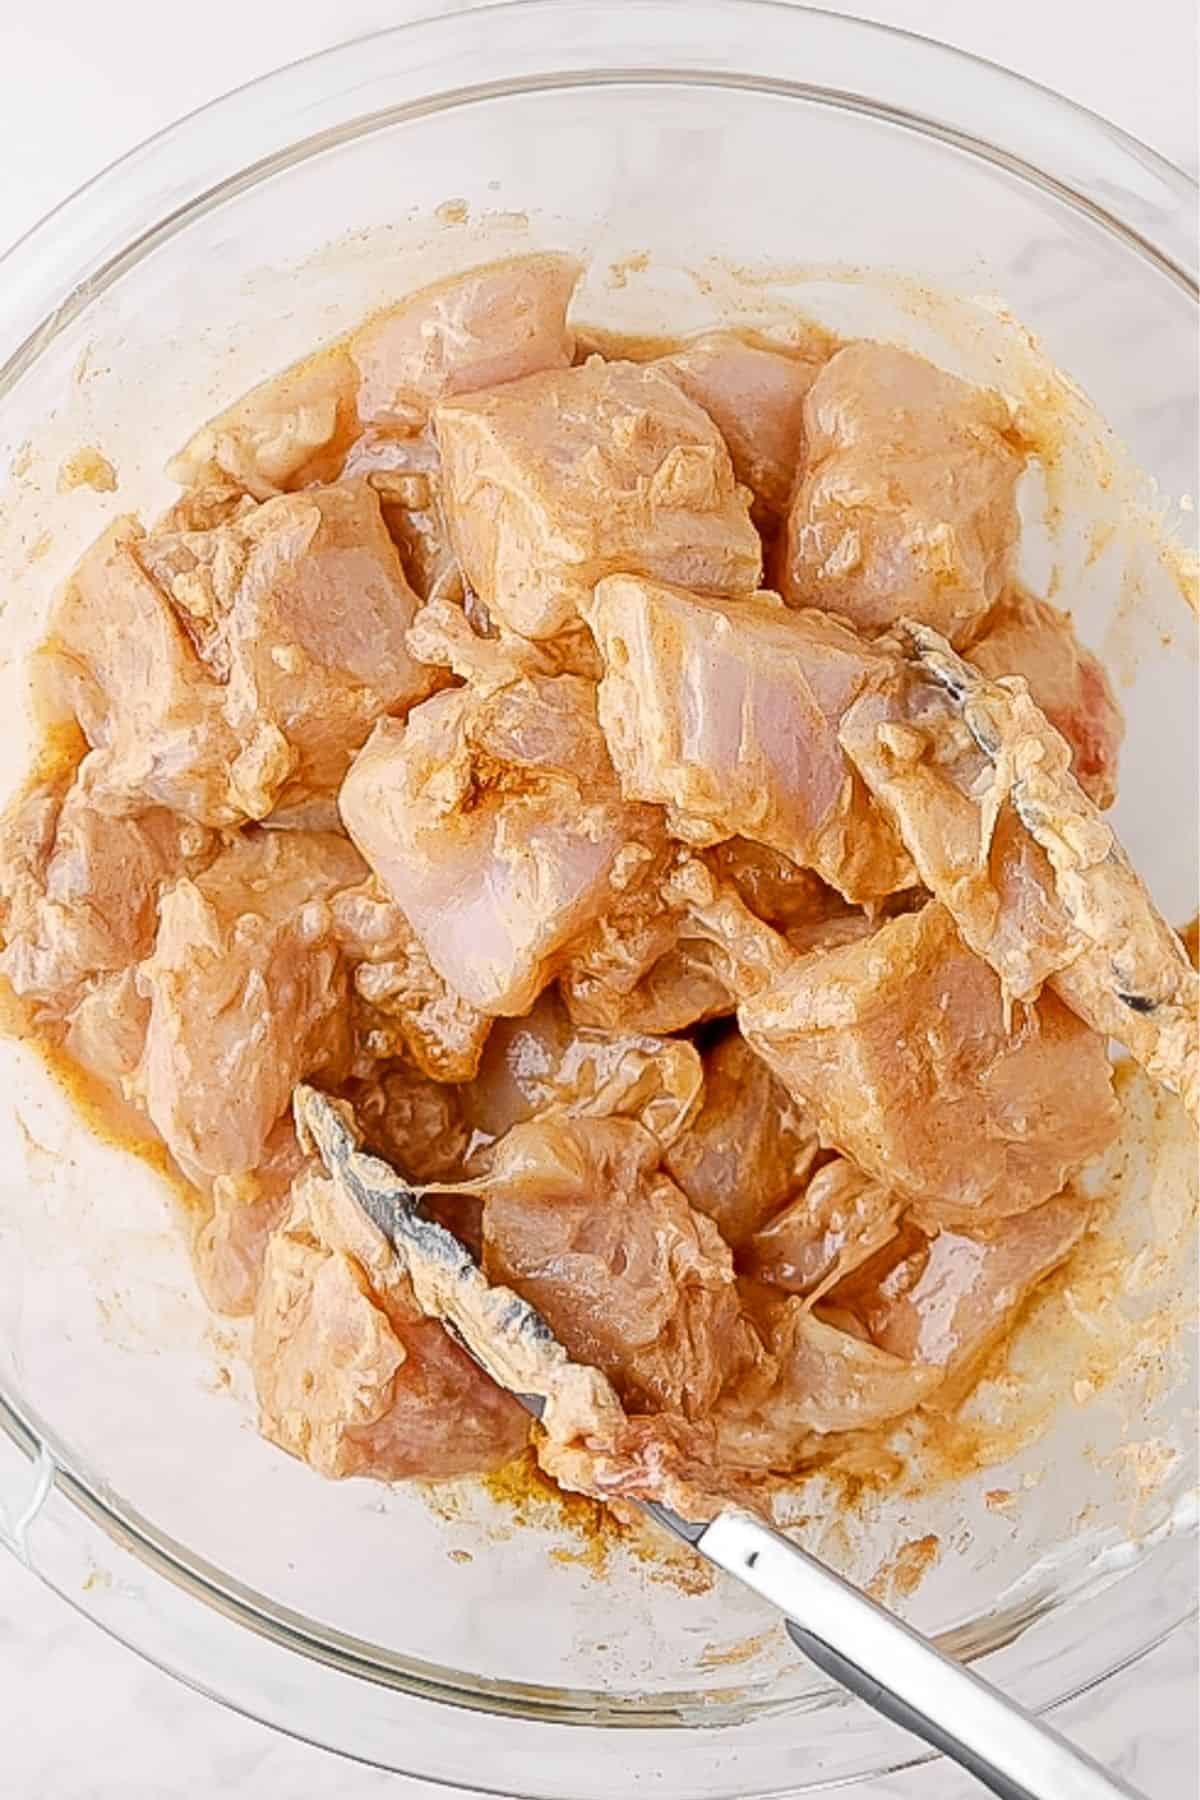 Chicken mixed in marinade, in a mixing bowl.